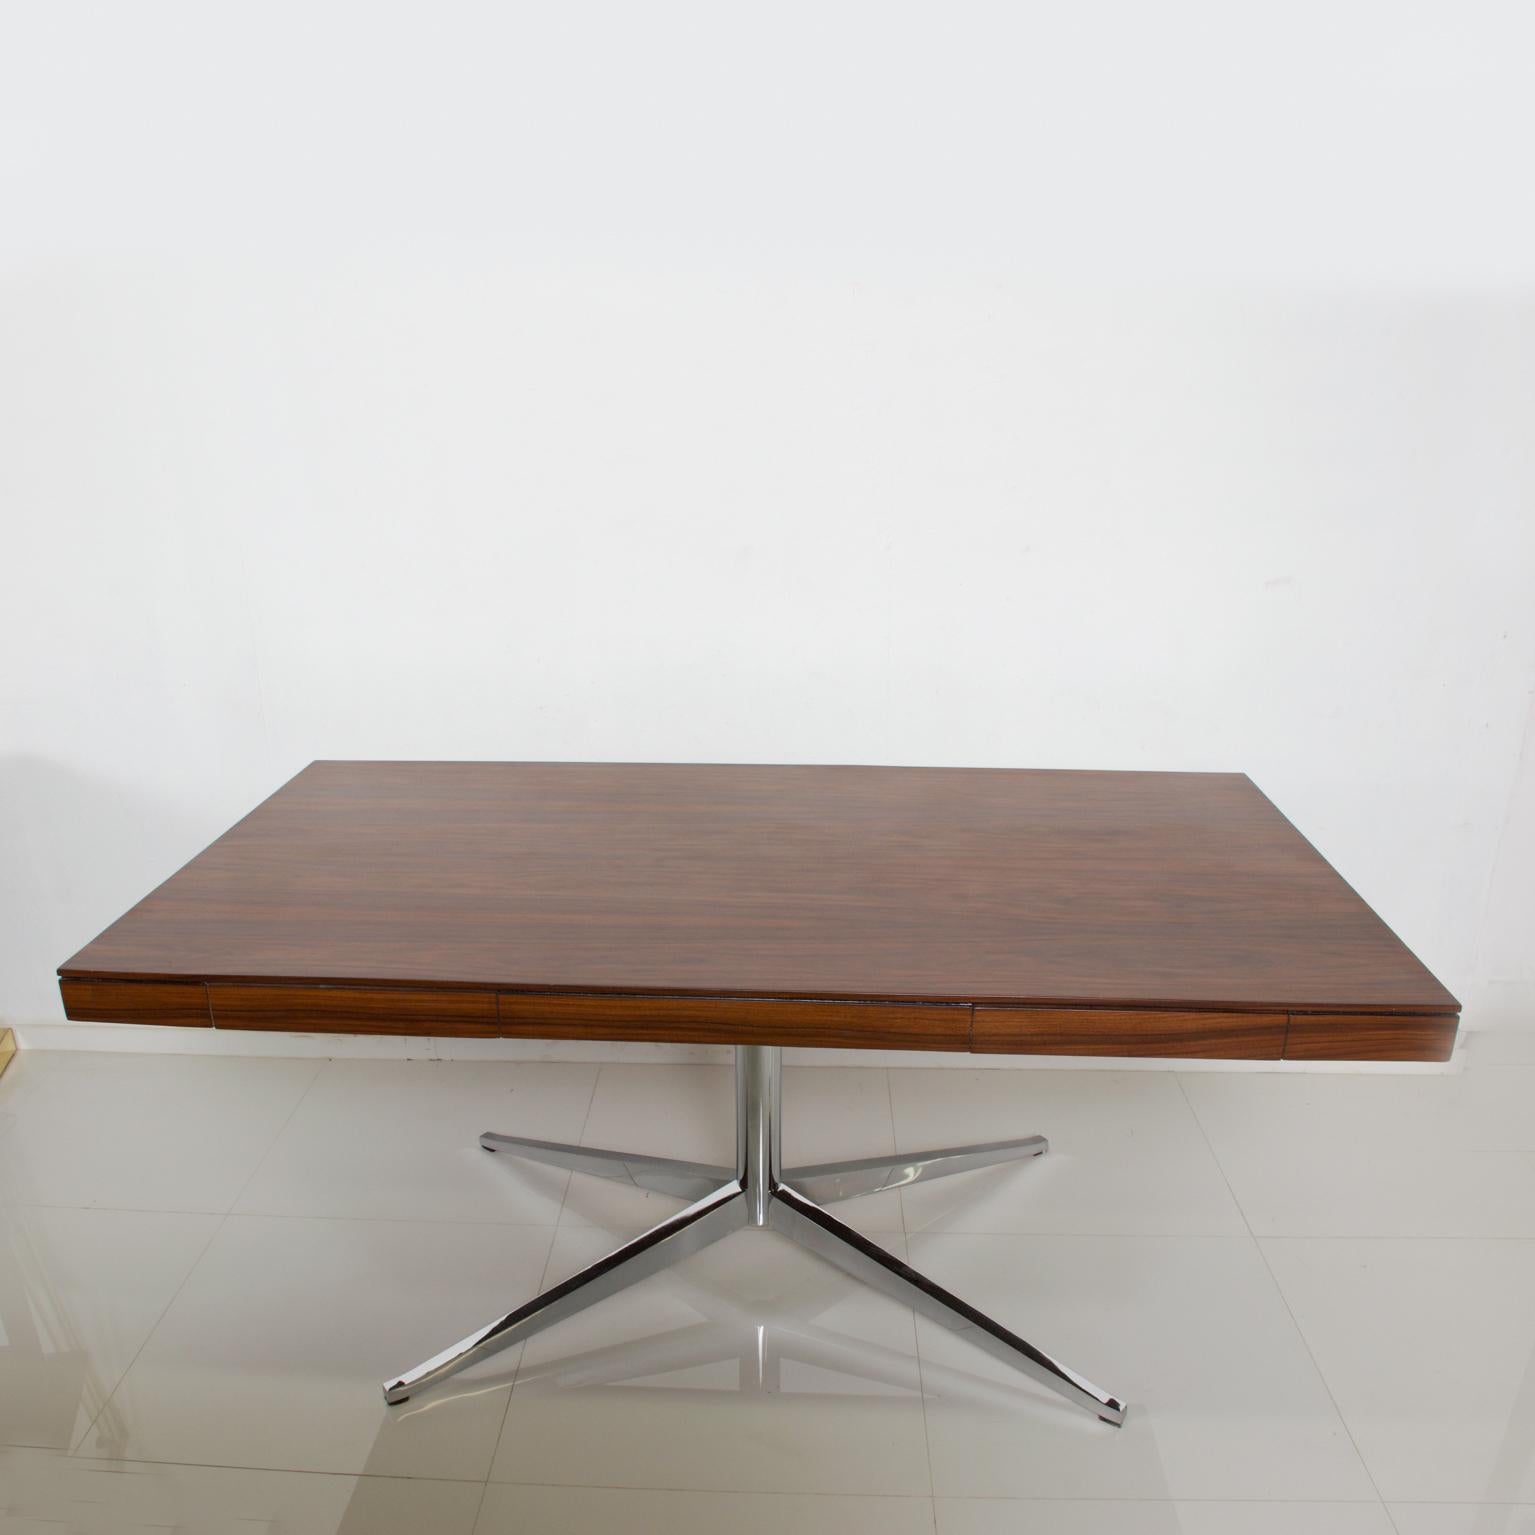 For consideration: Florence Knoll Rosewood Partners Desk Chrome Plated Legs Mid Century Modern

Designed in Rosewood with Chrome plated legs. Fabulous classic Knoll design.

Dimensions: 63 3/4